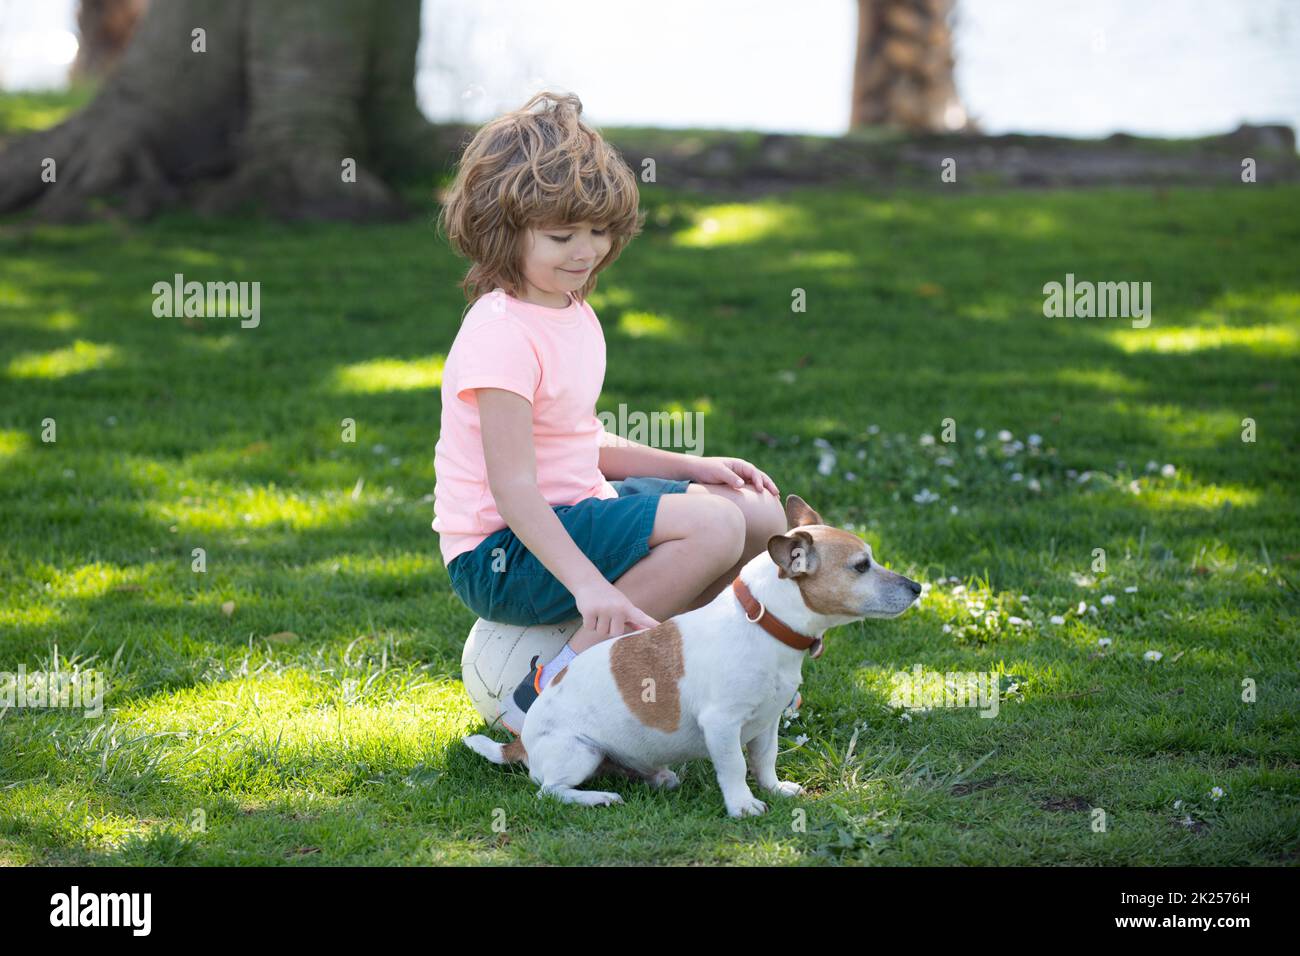 Kid caress dog. Child boy with dog walking outdoor. Kid playing with puppy. Children with pet friend. Stock Photo